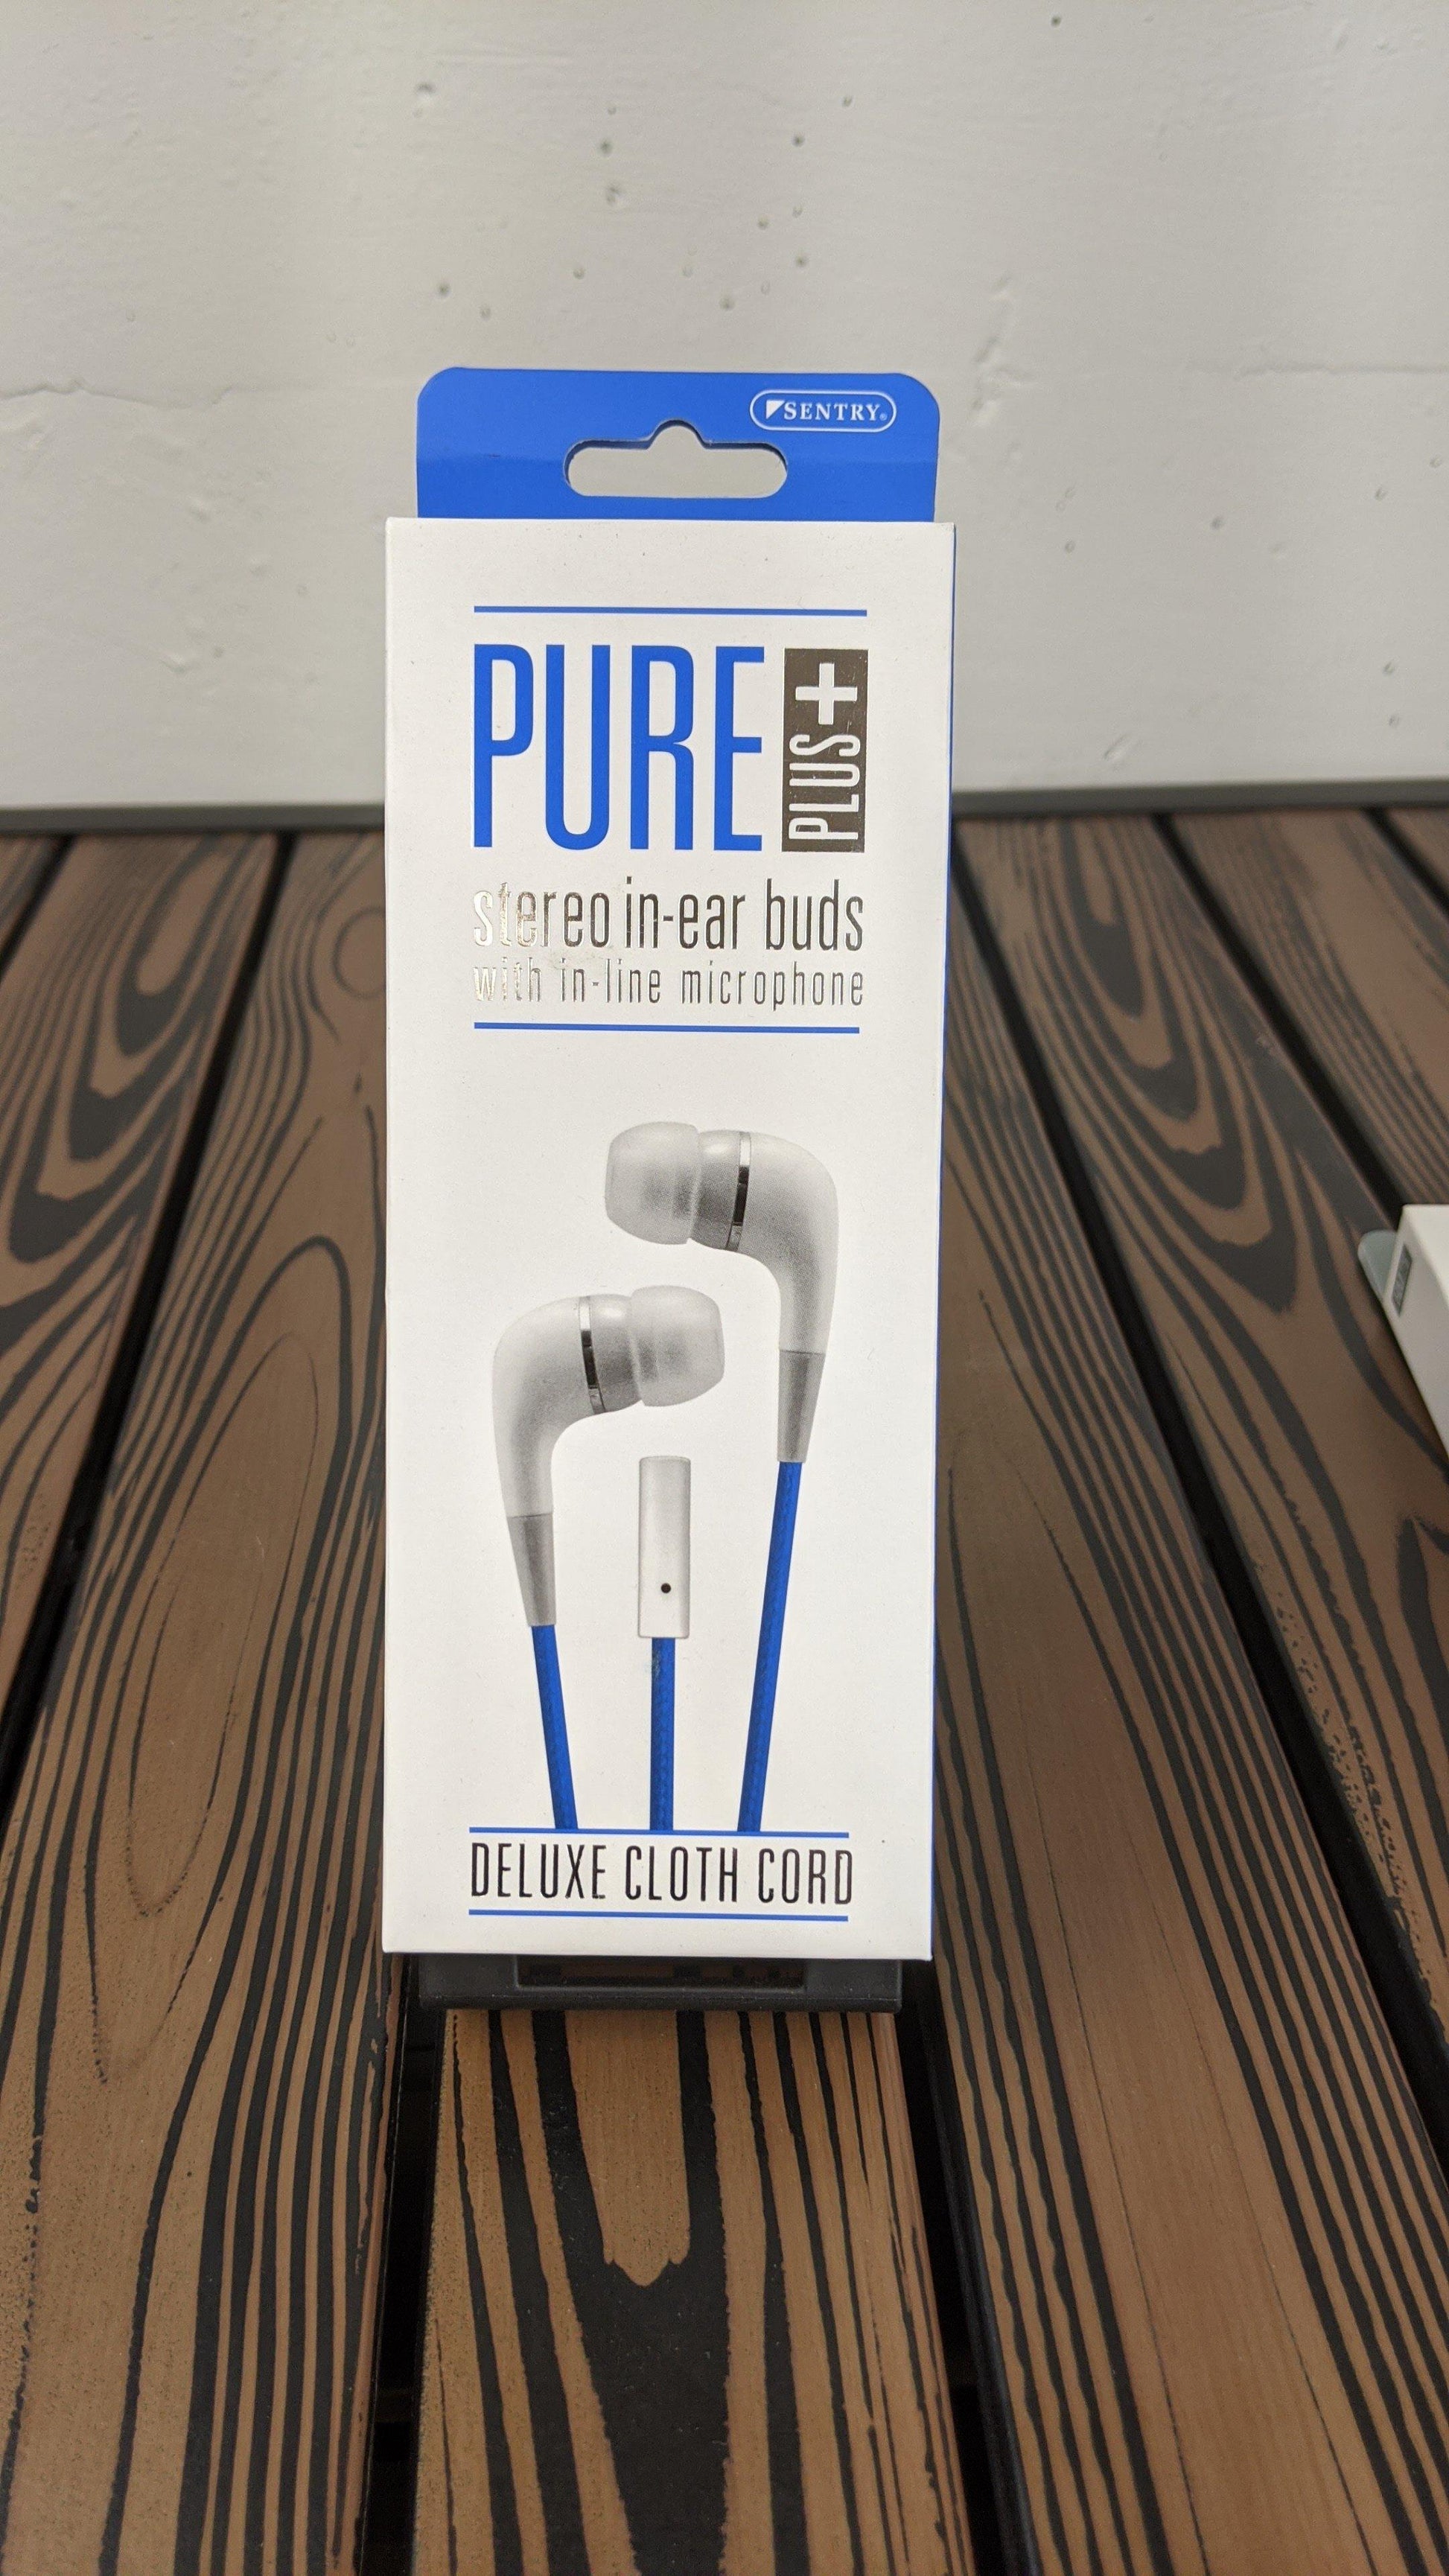 Pure plus earbuds - PCMaster Pro 